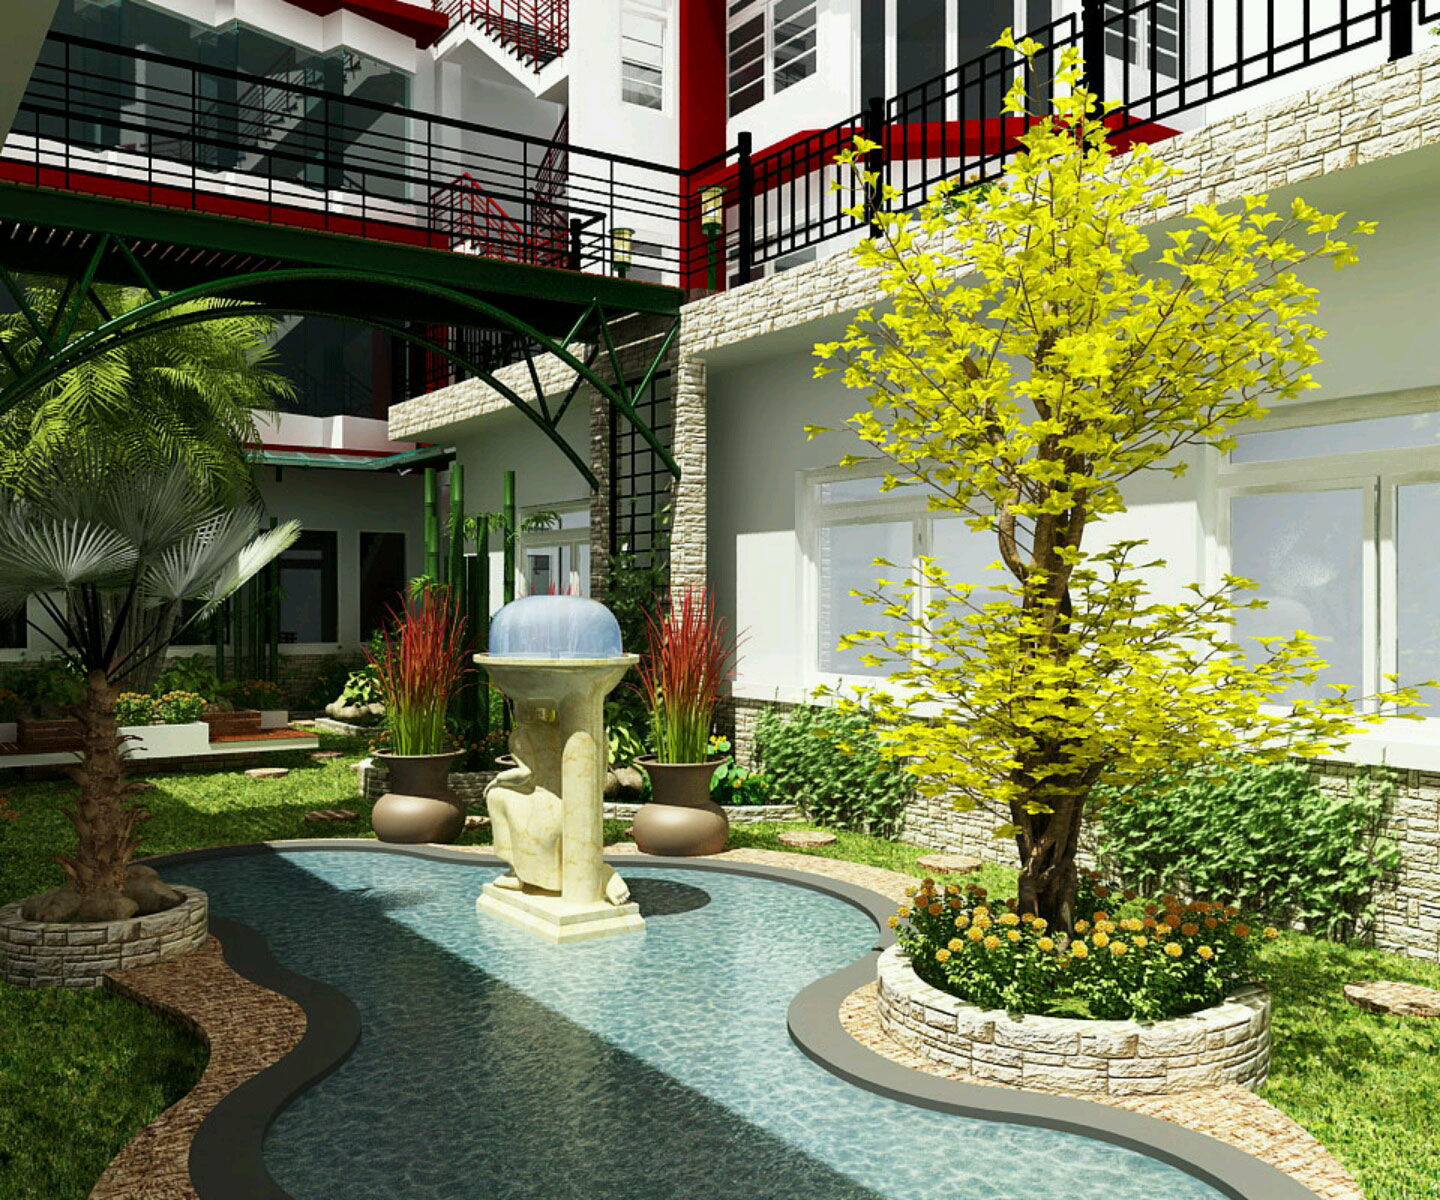 Modern Luxury Ideas Awesome Modern Luxury Garden Design Ideas With Contemporary Pool Furnished With Fountain Completed With Neat Green Grass And Hodgepodge Trees Garden Garden Design Ideas As The Additional Decoration For Enhancing House